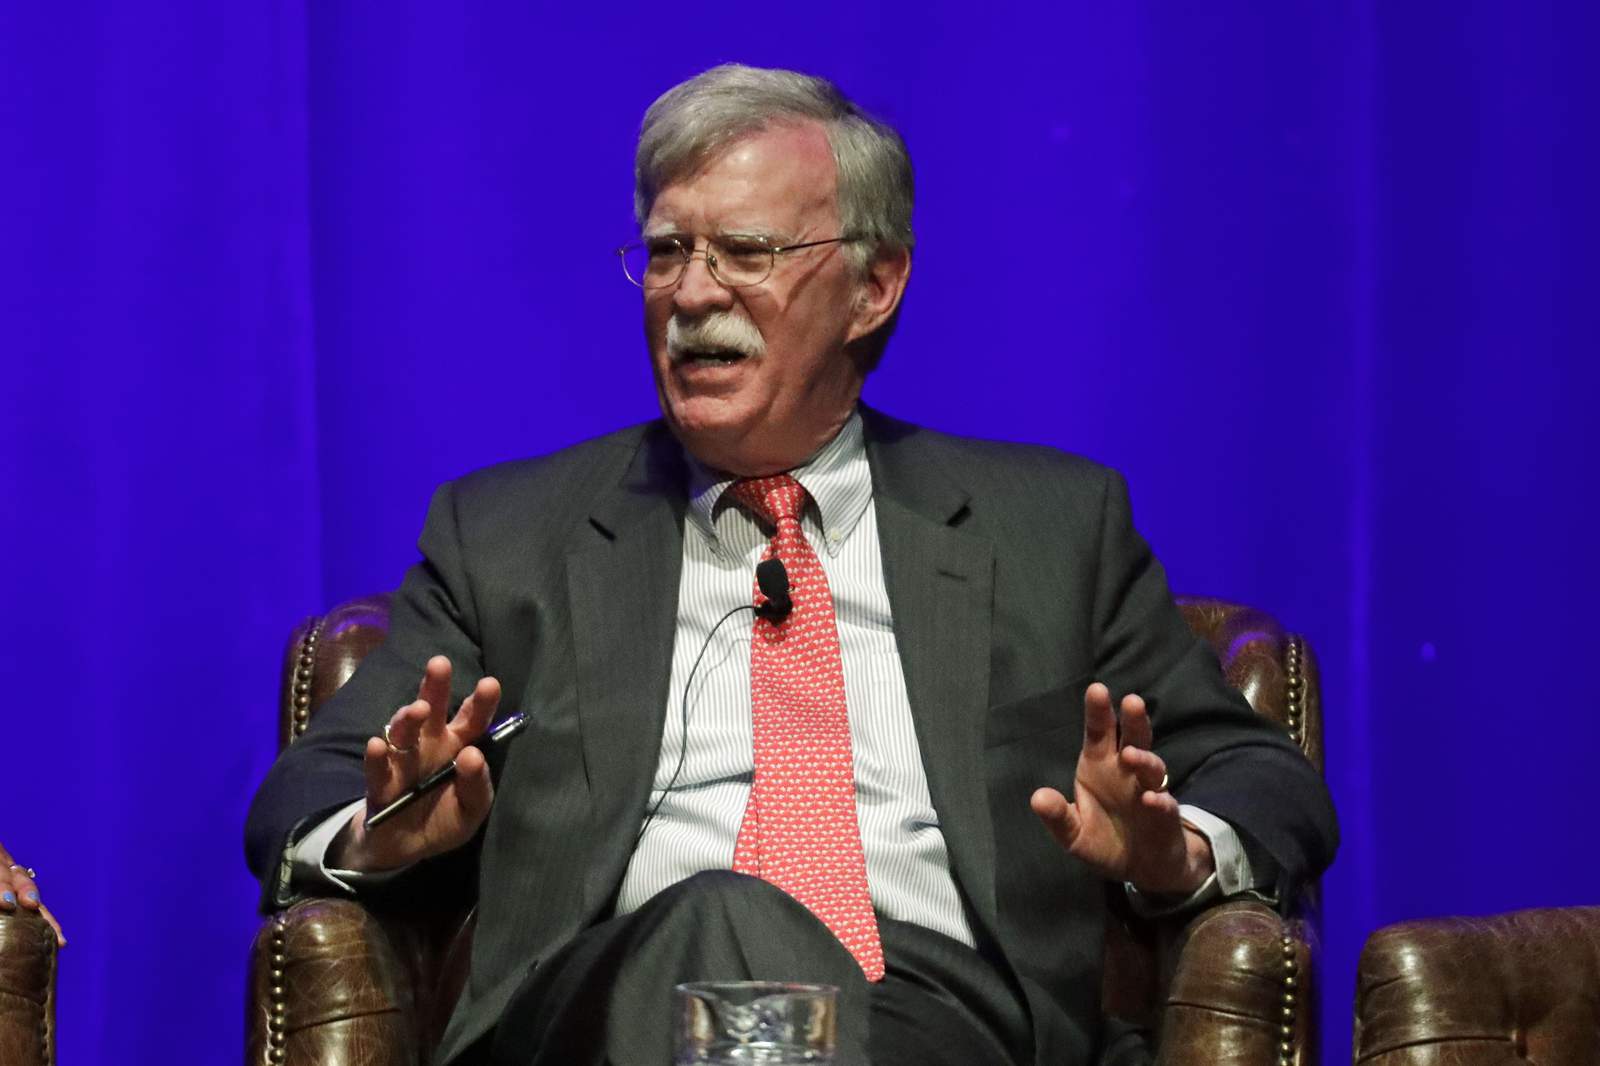 Trump administration sues to block release of Bolton book